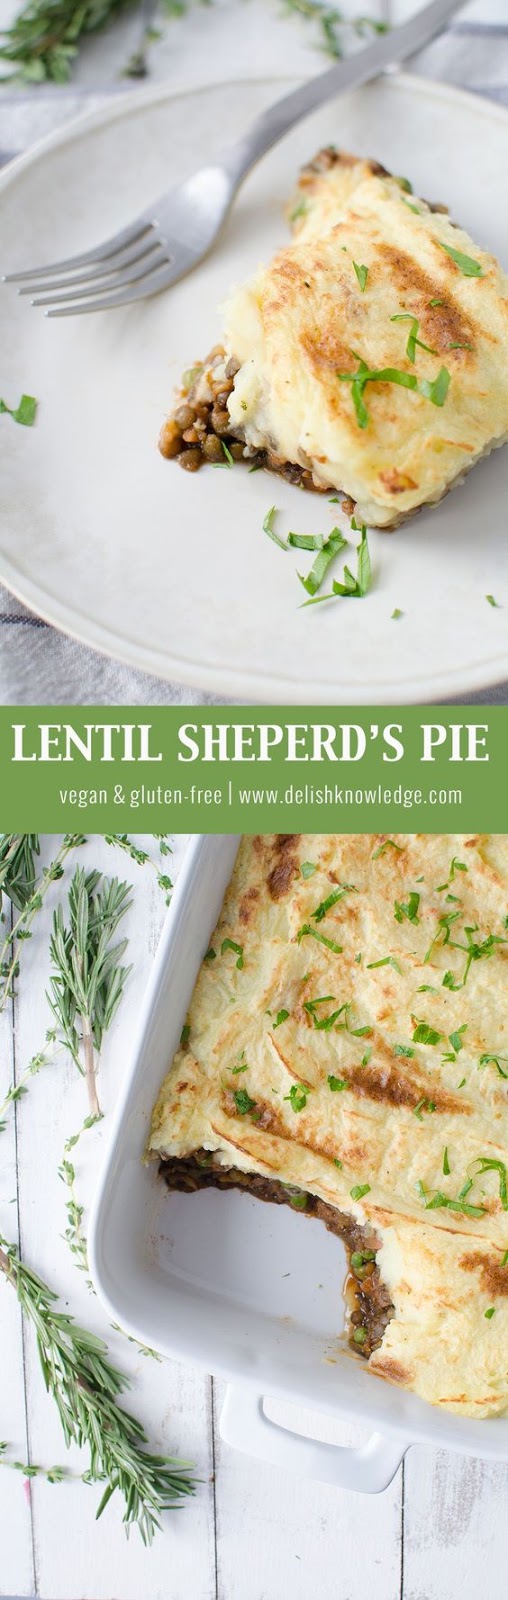 Lentil Shepherd's Pie! A rich, vegan lentil stew topped with homemade mashed potatoes.